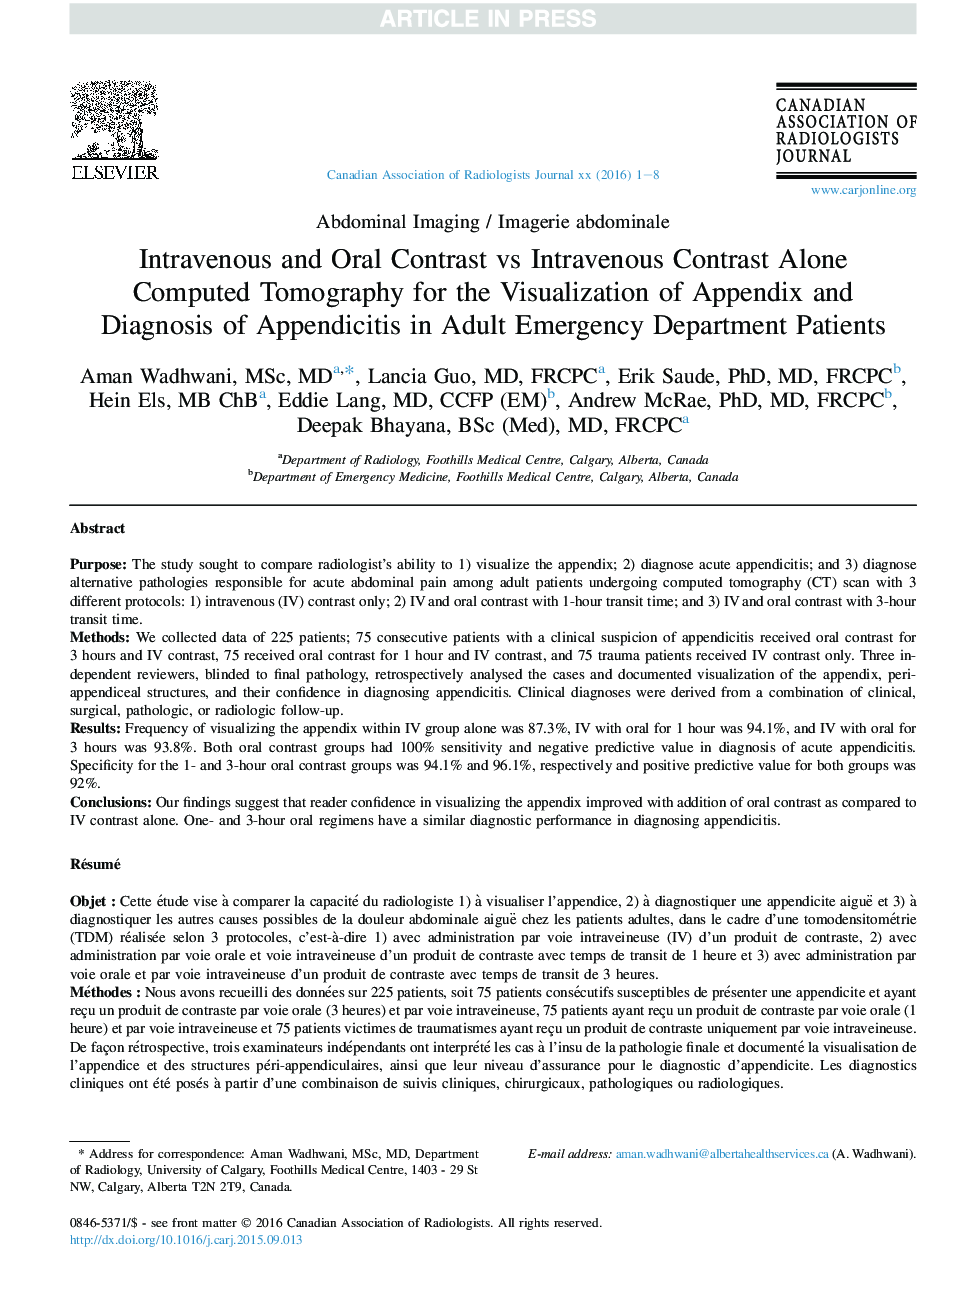 Intravenous and Oral Contrast vs Intravenous Contrast Alone Computed Tomography for the Visualization of Appendix and Diagnosis of Appendicitis in Adult Emergency Department Patients